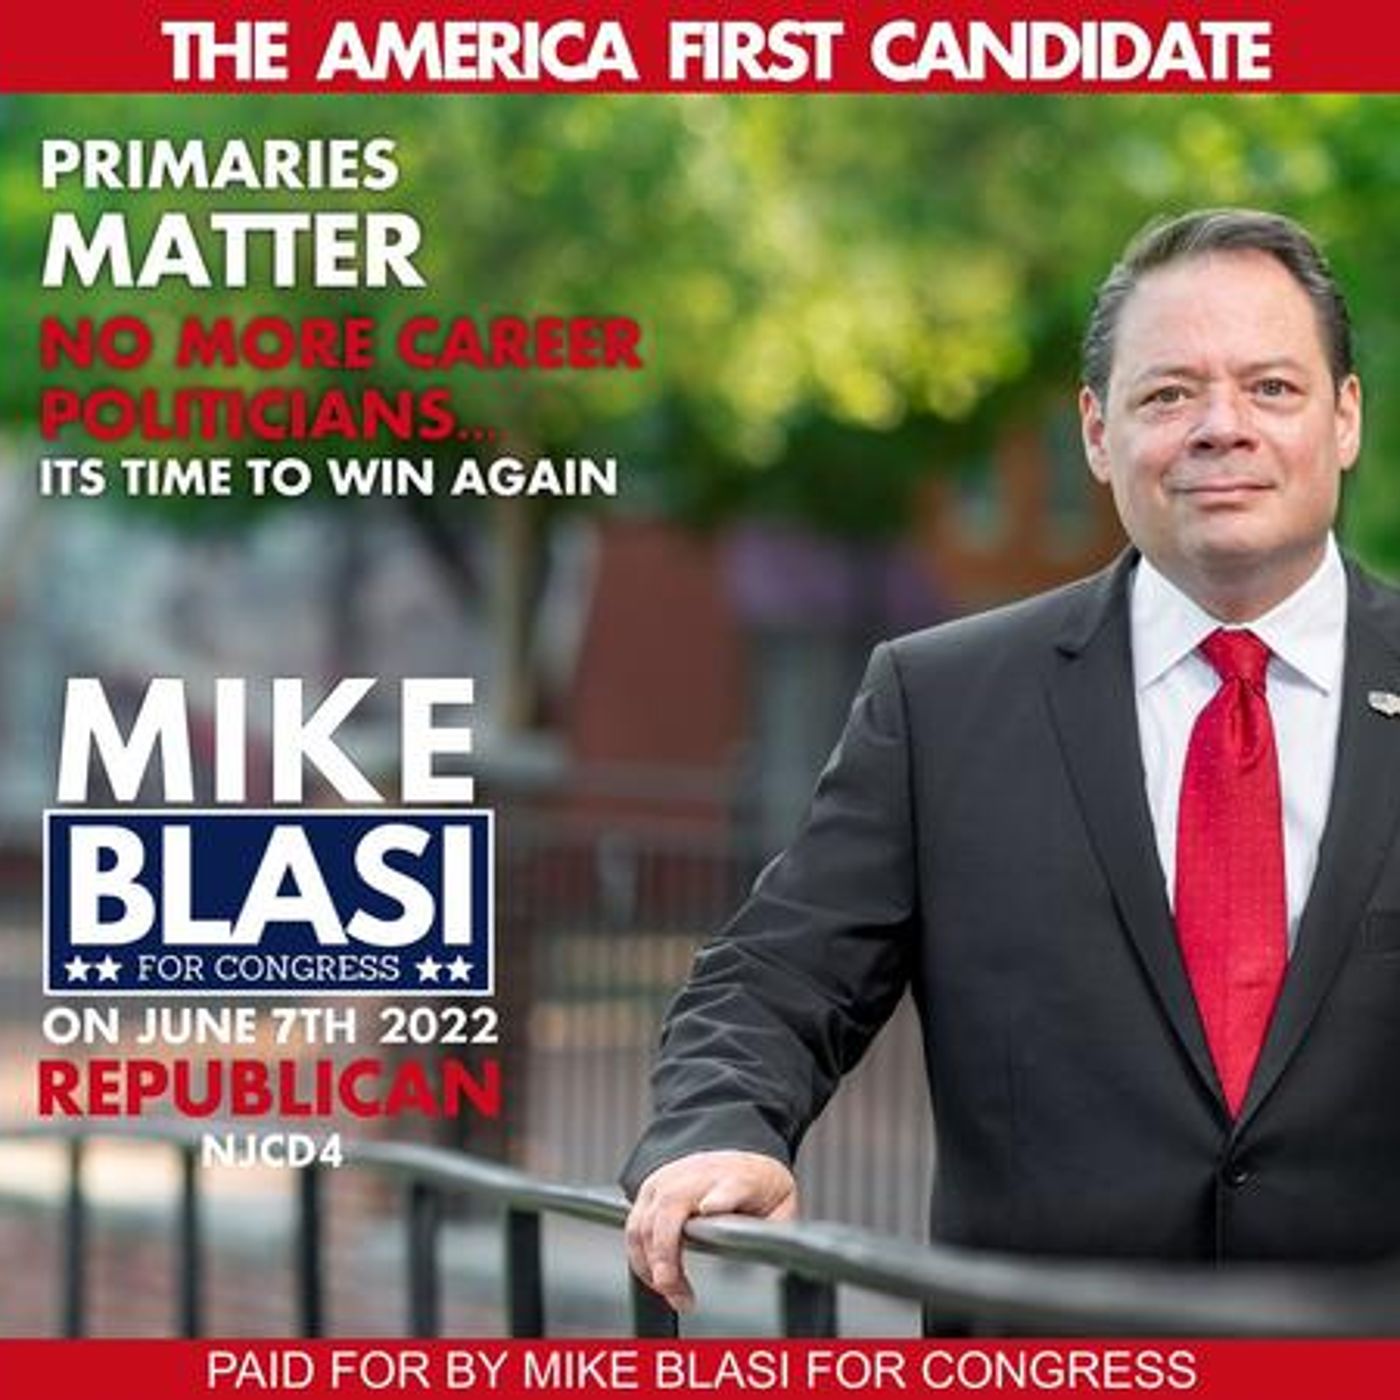 The CHAUNCEY Show-Meet Mike Blasi (R) 2022 Candidate for US Congress NJ D4